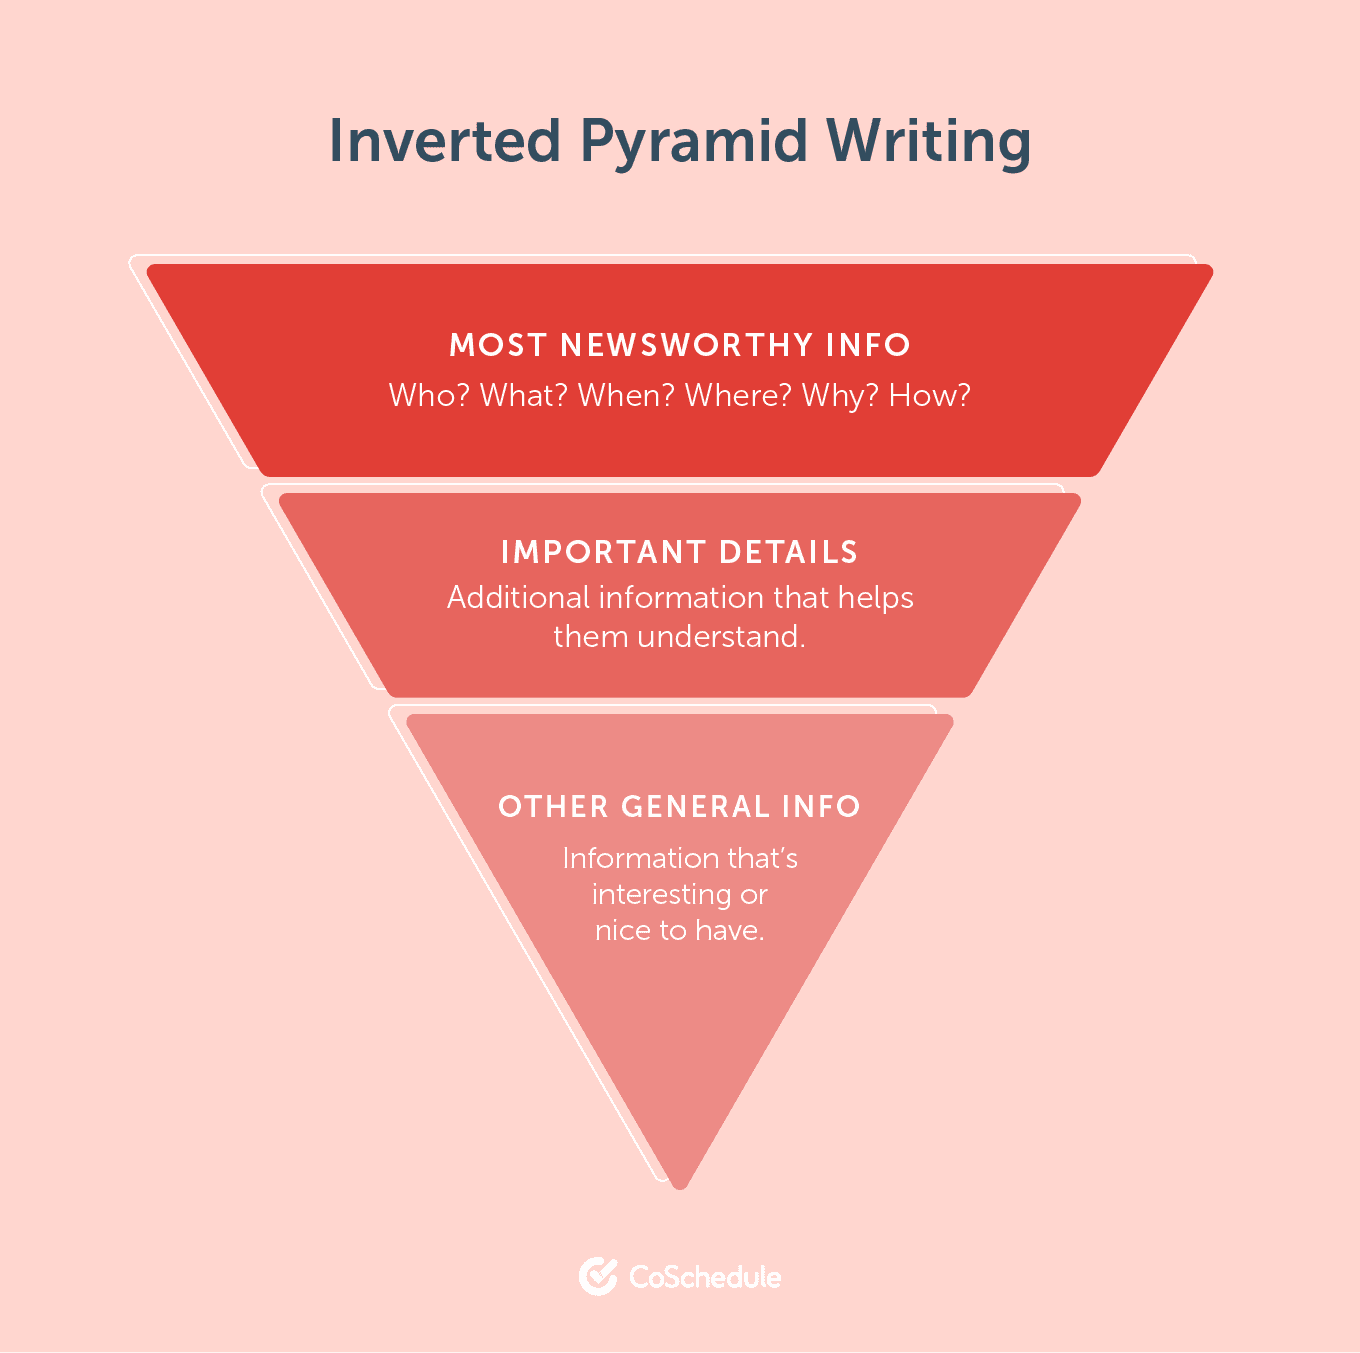 Inverted Pyramid Writing to help with writing organization